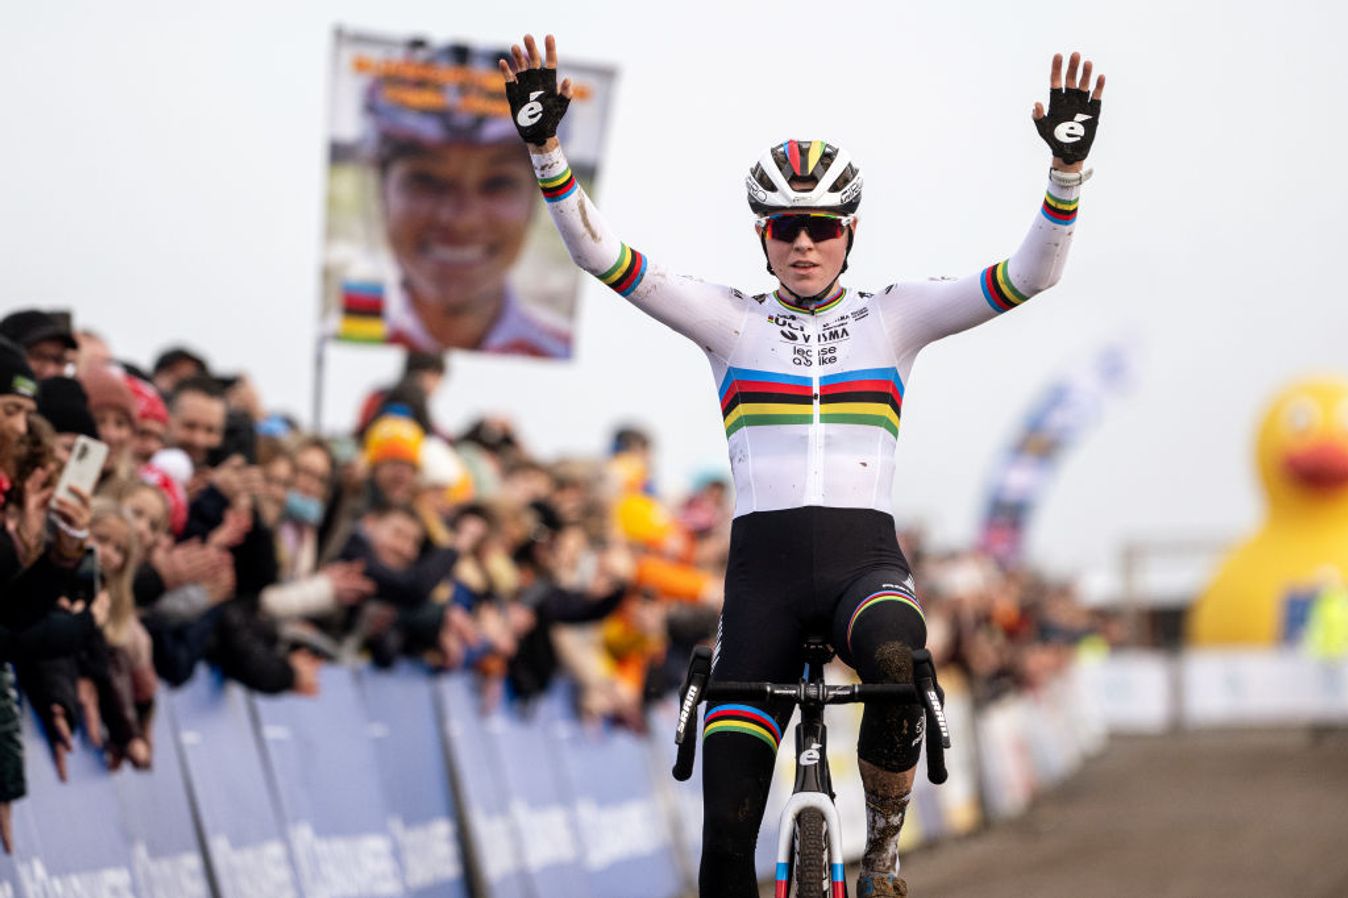 Fem van Empel starts her road season off the back of a truly dominant cyclo-cross campaign